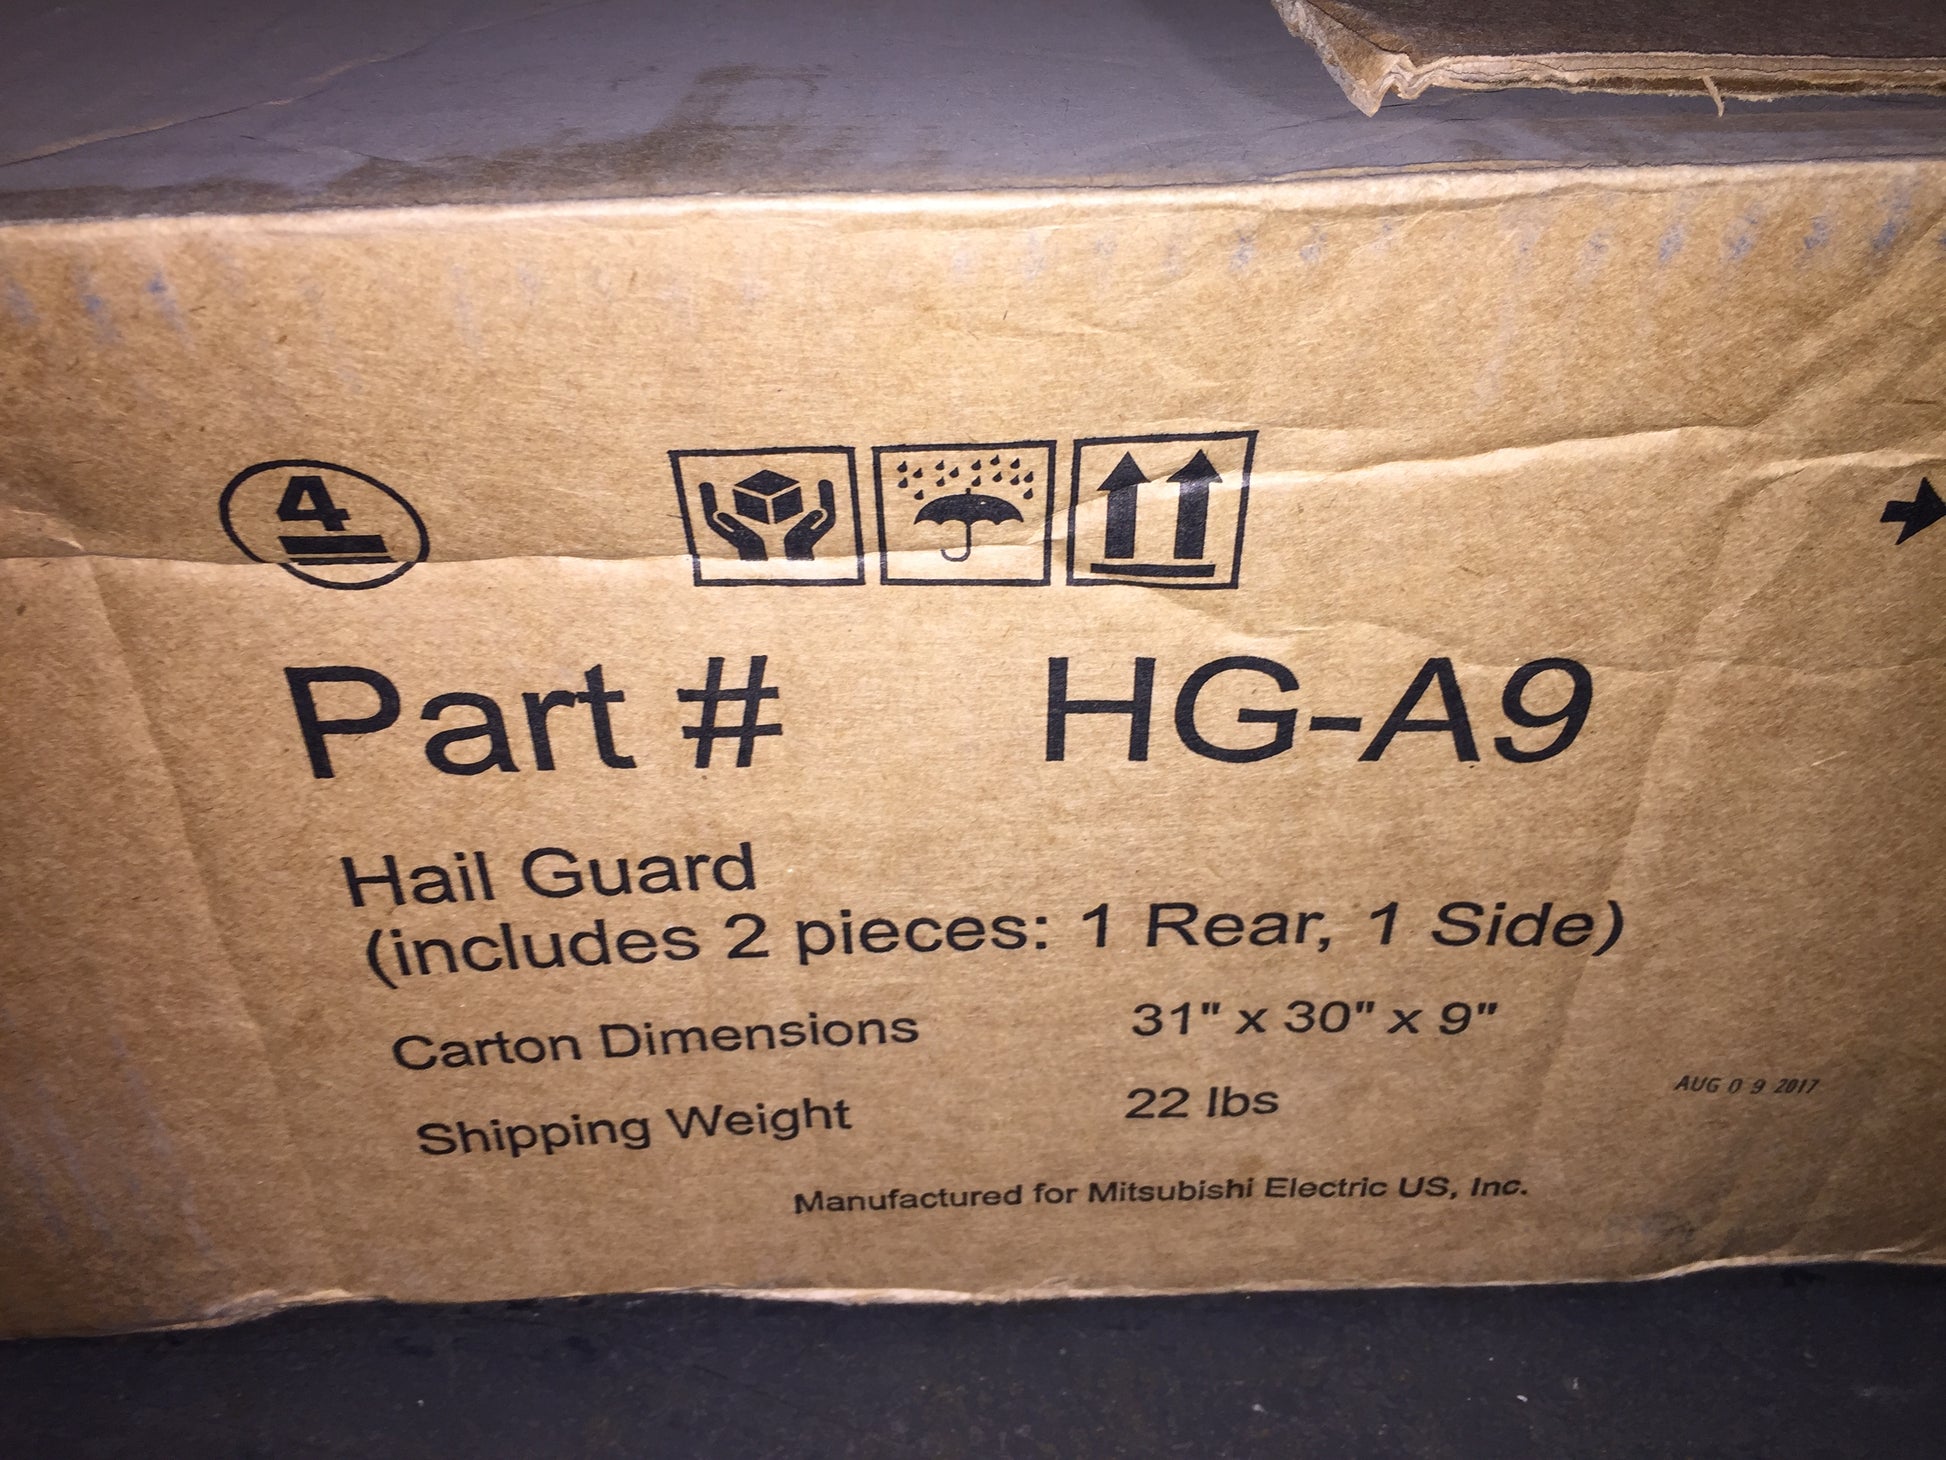 Hail Guard for M-Series and P-Series Packaged Terminal Air Conditioners